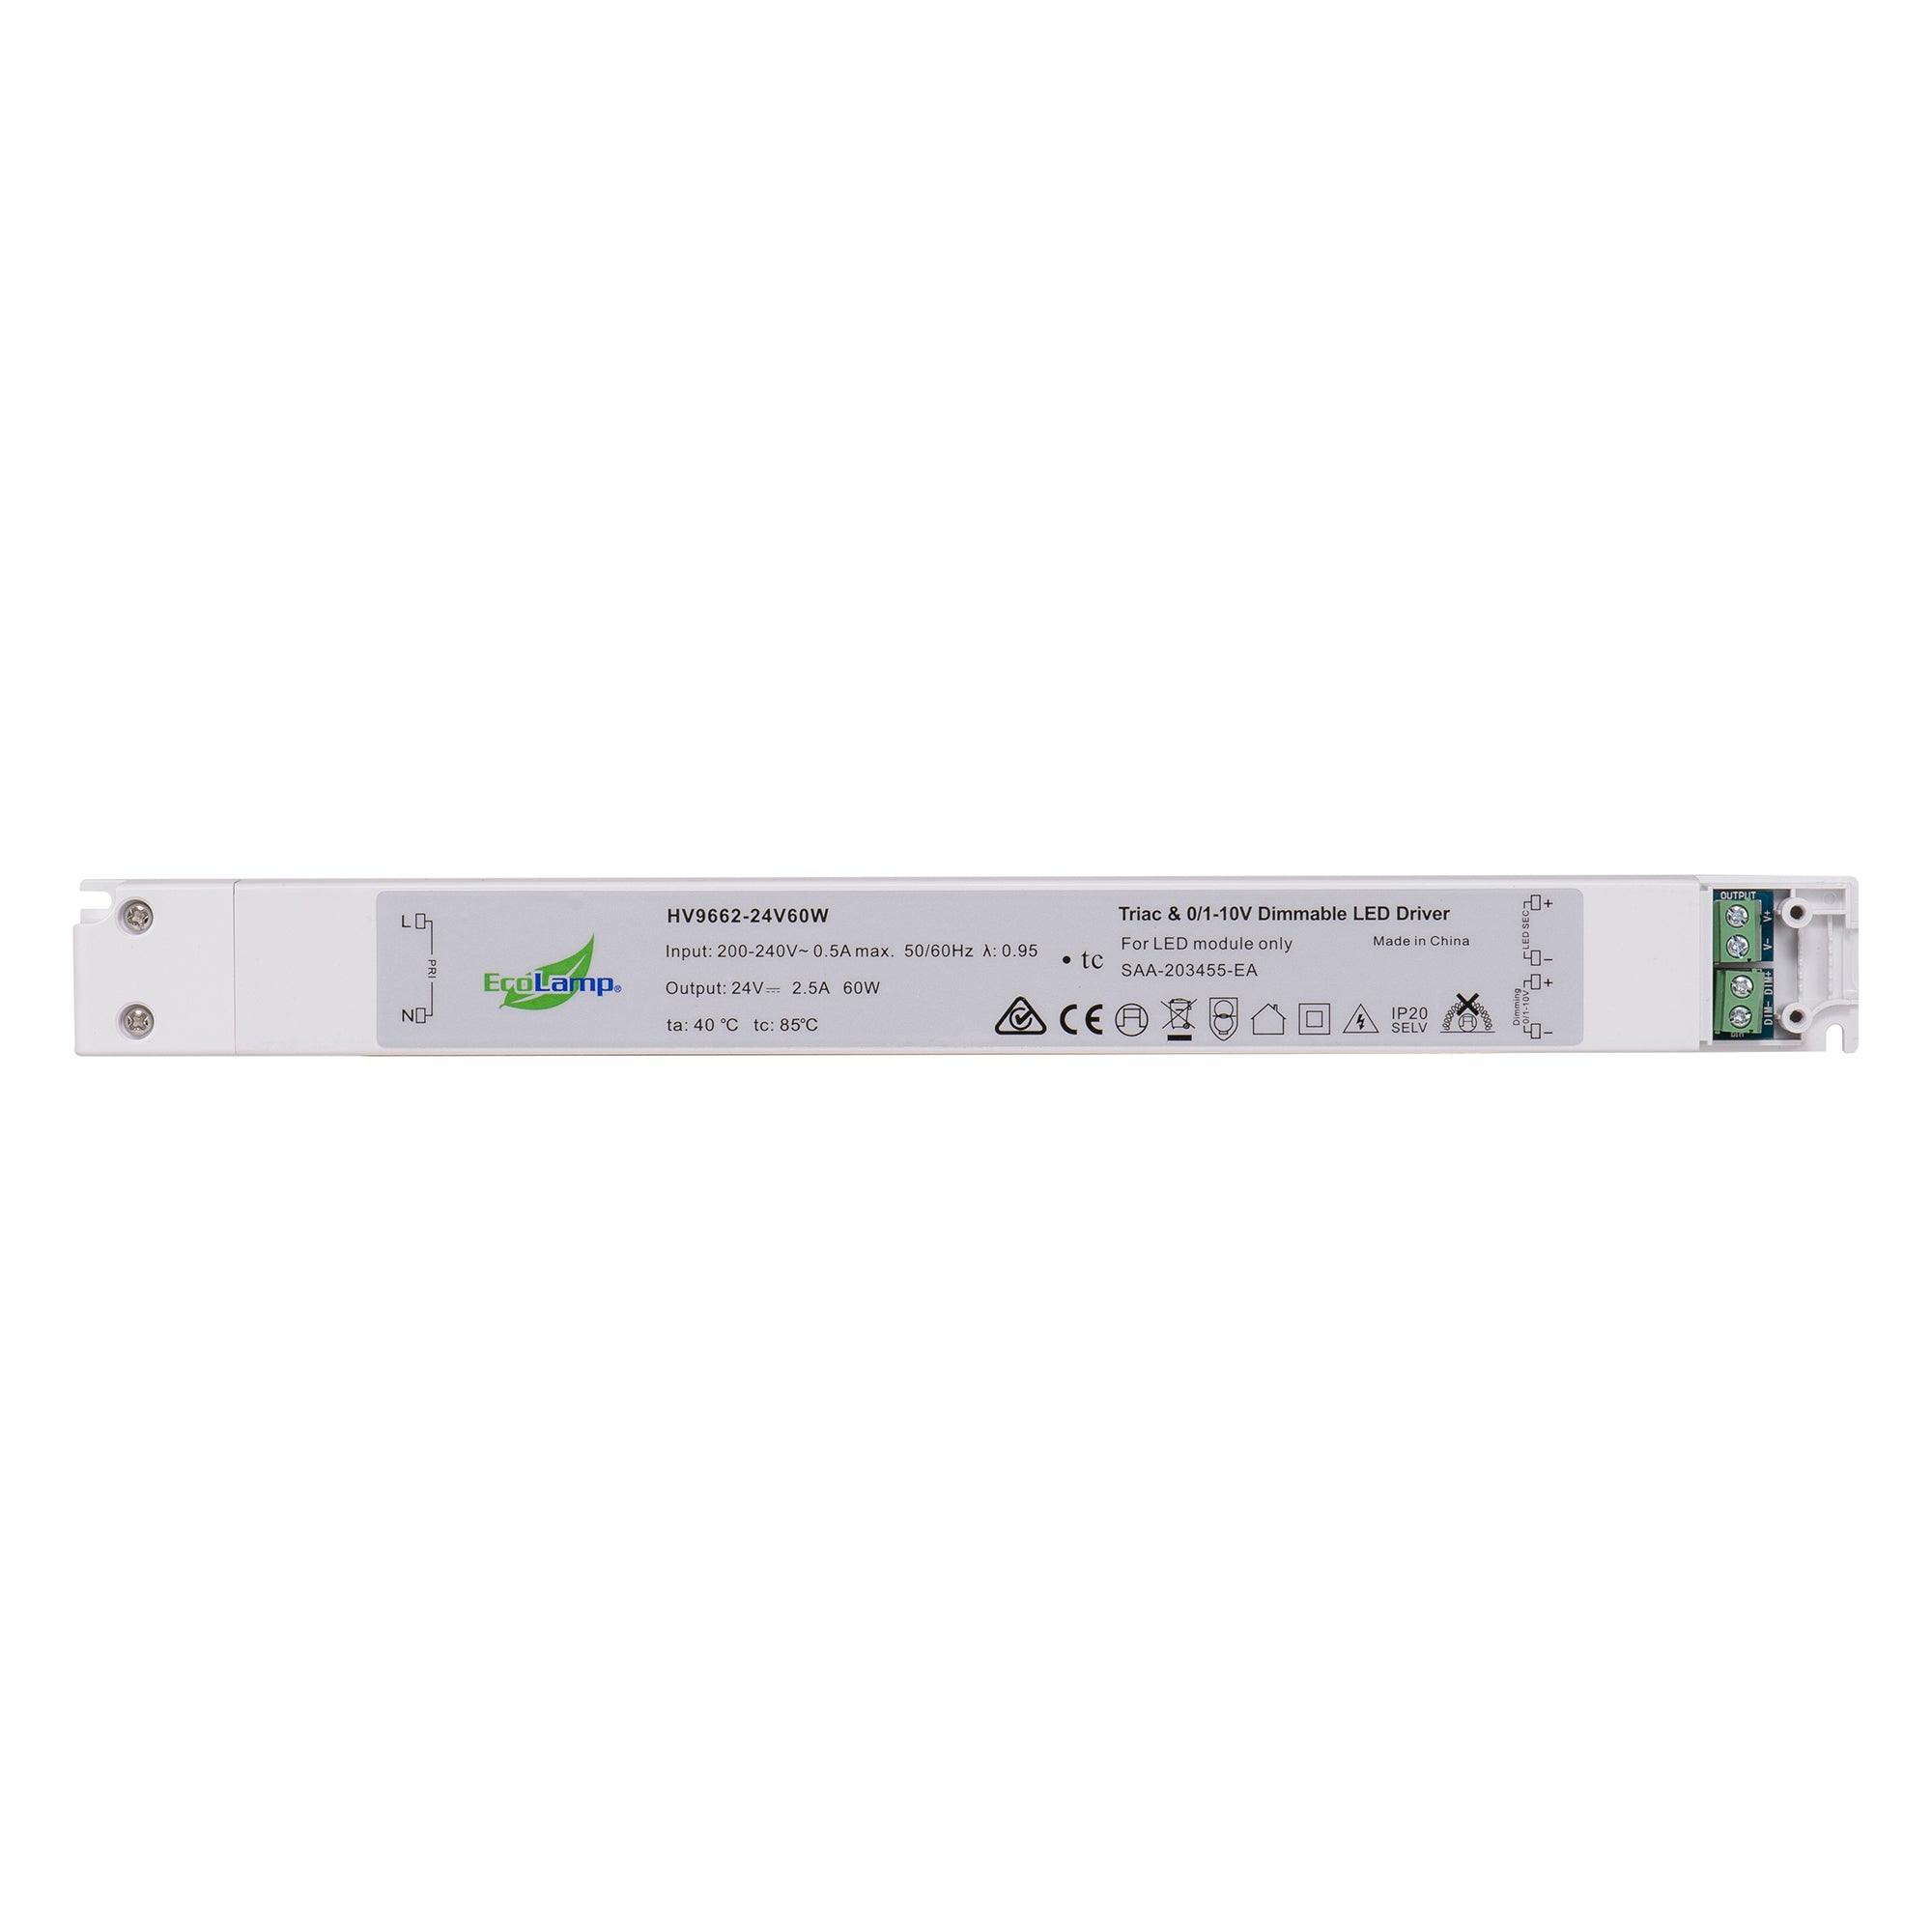 HV9662-60W IP20 Triac + 0-1/10v 2 in 1 Dimmable LED Driver